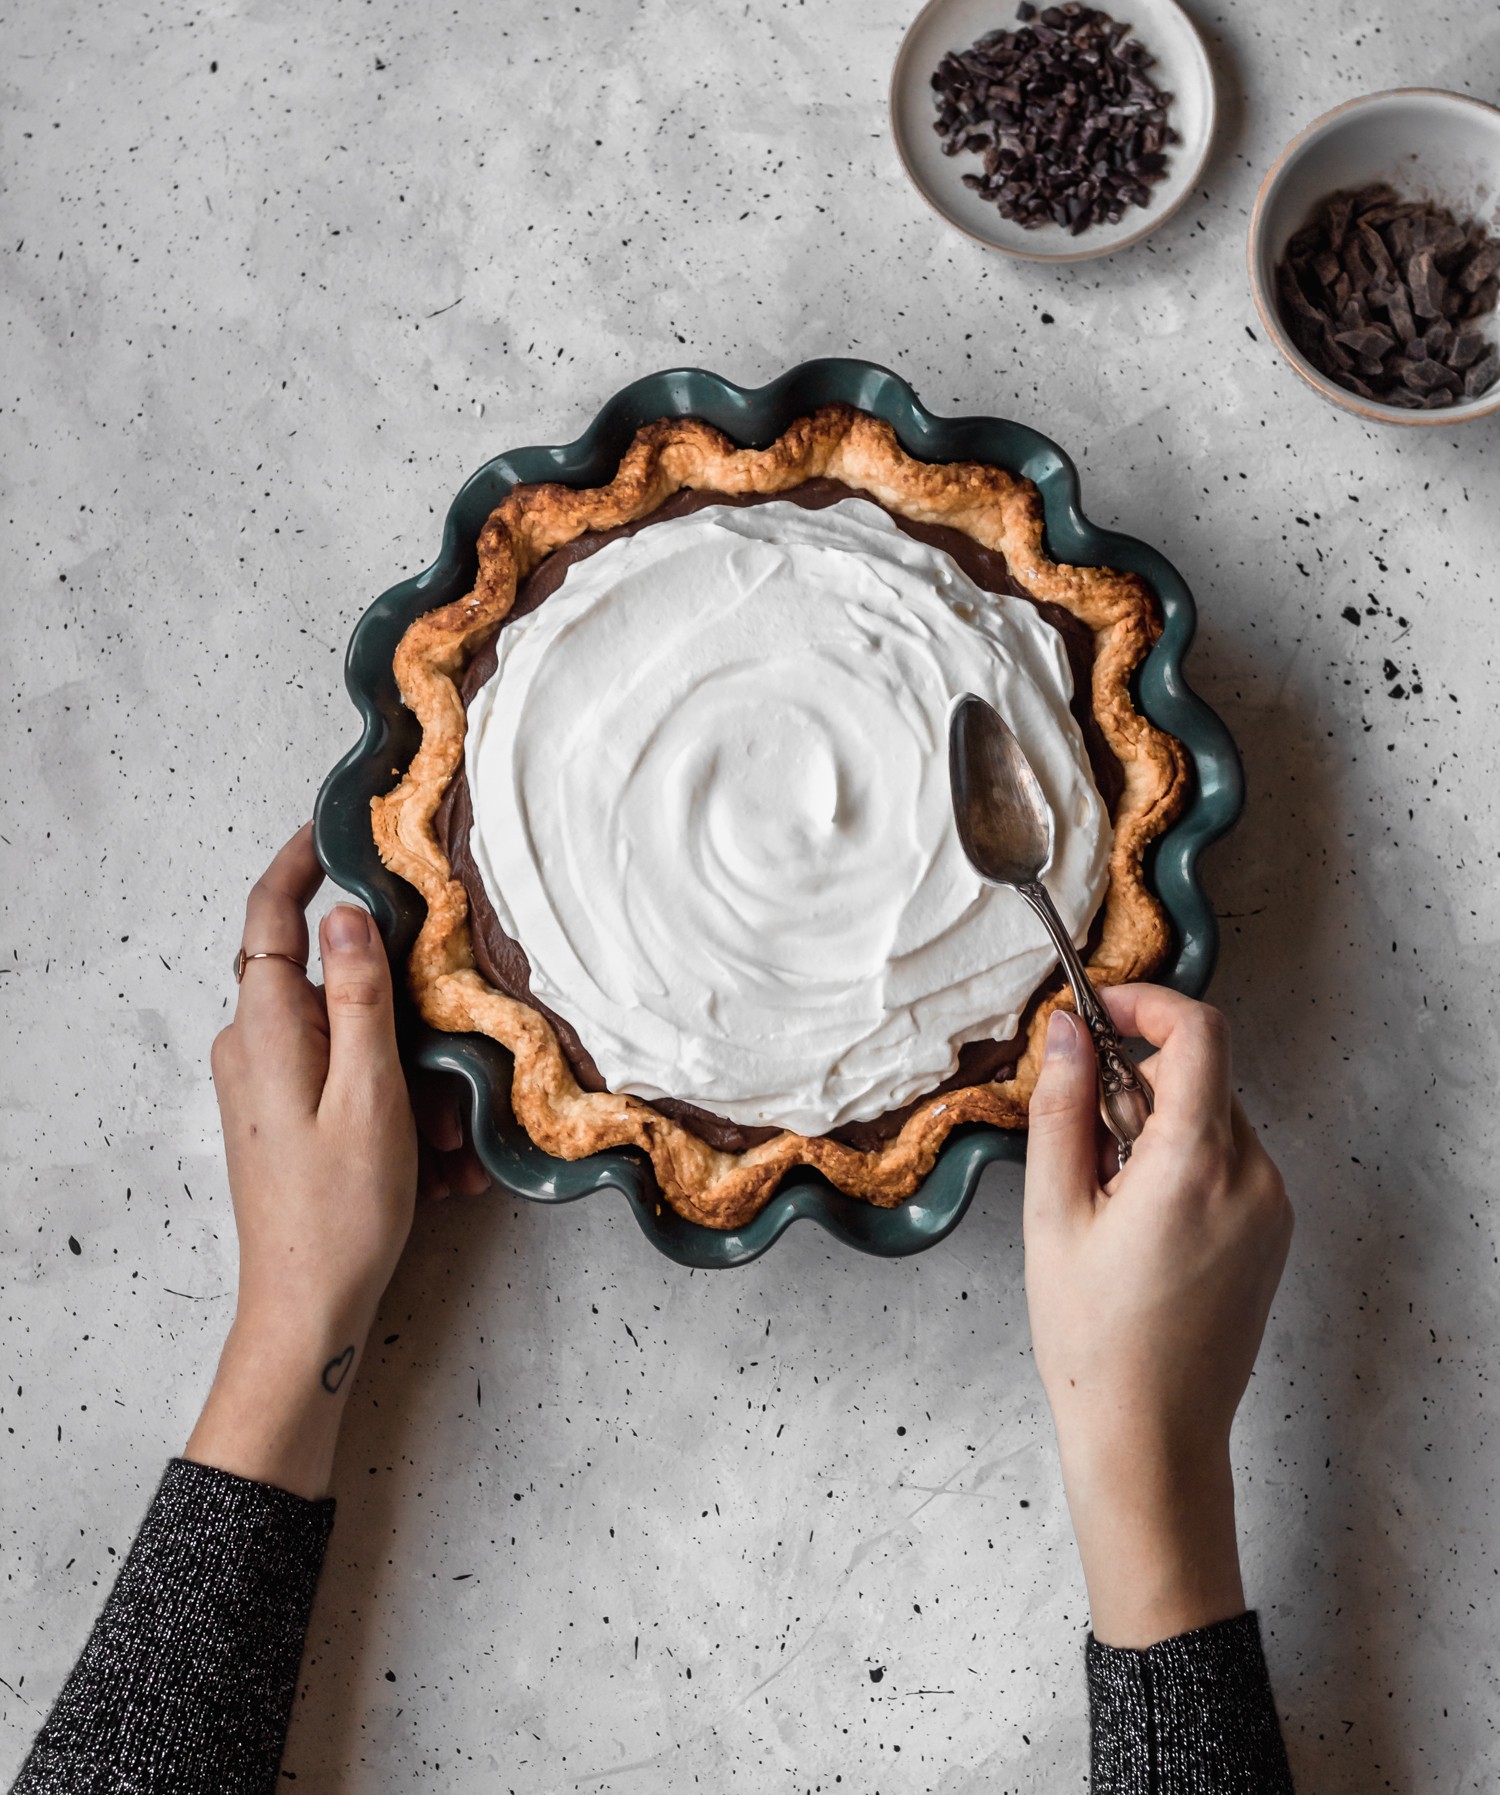 An overhead image of a woman's hands spreading whipped cream over a chocolate cream pie on a grey speckled table.